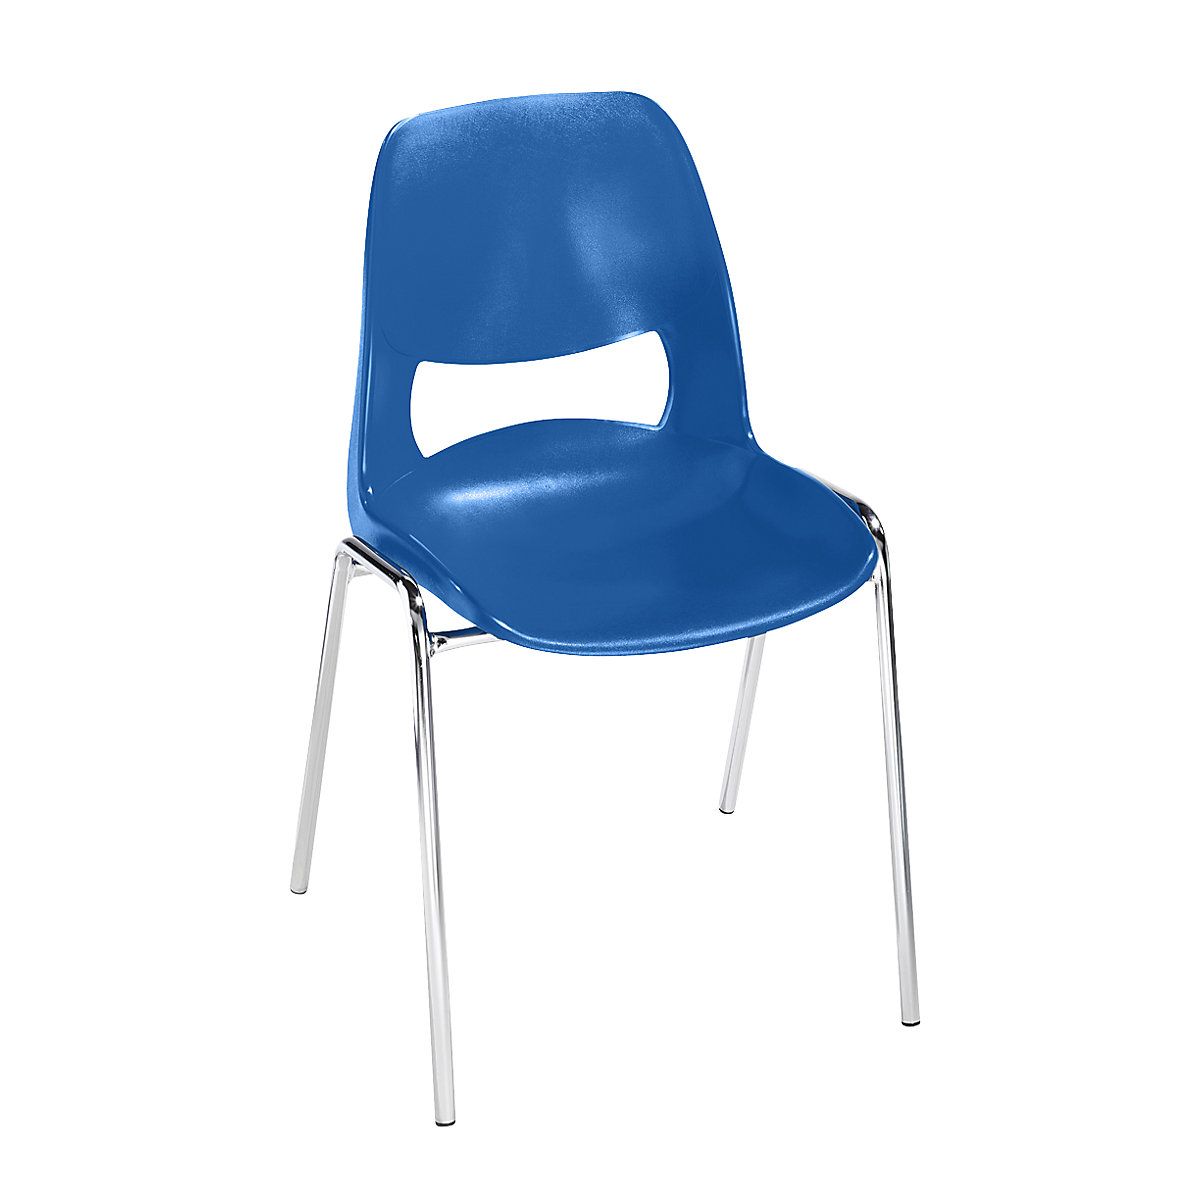 Stacking Chair Made Of Polypropylene, Plastic Classroom Chairs Cost